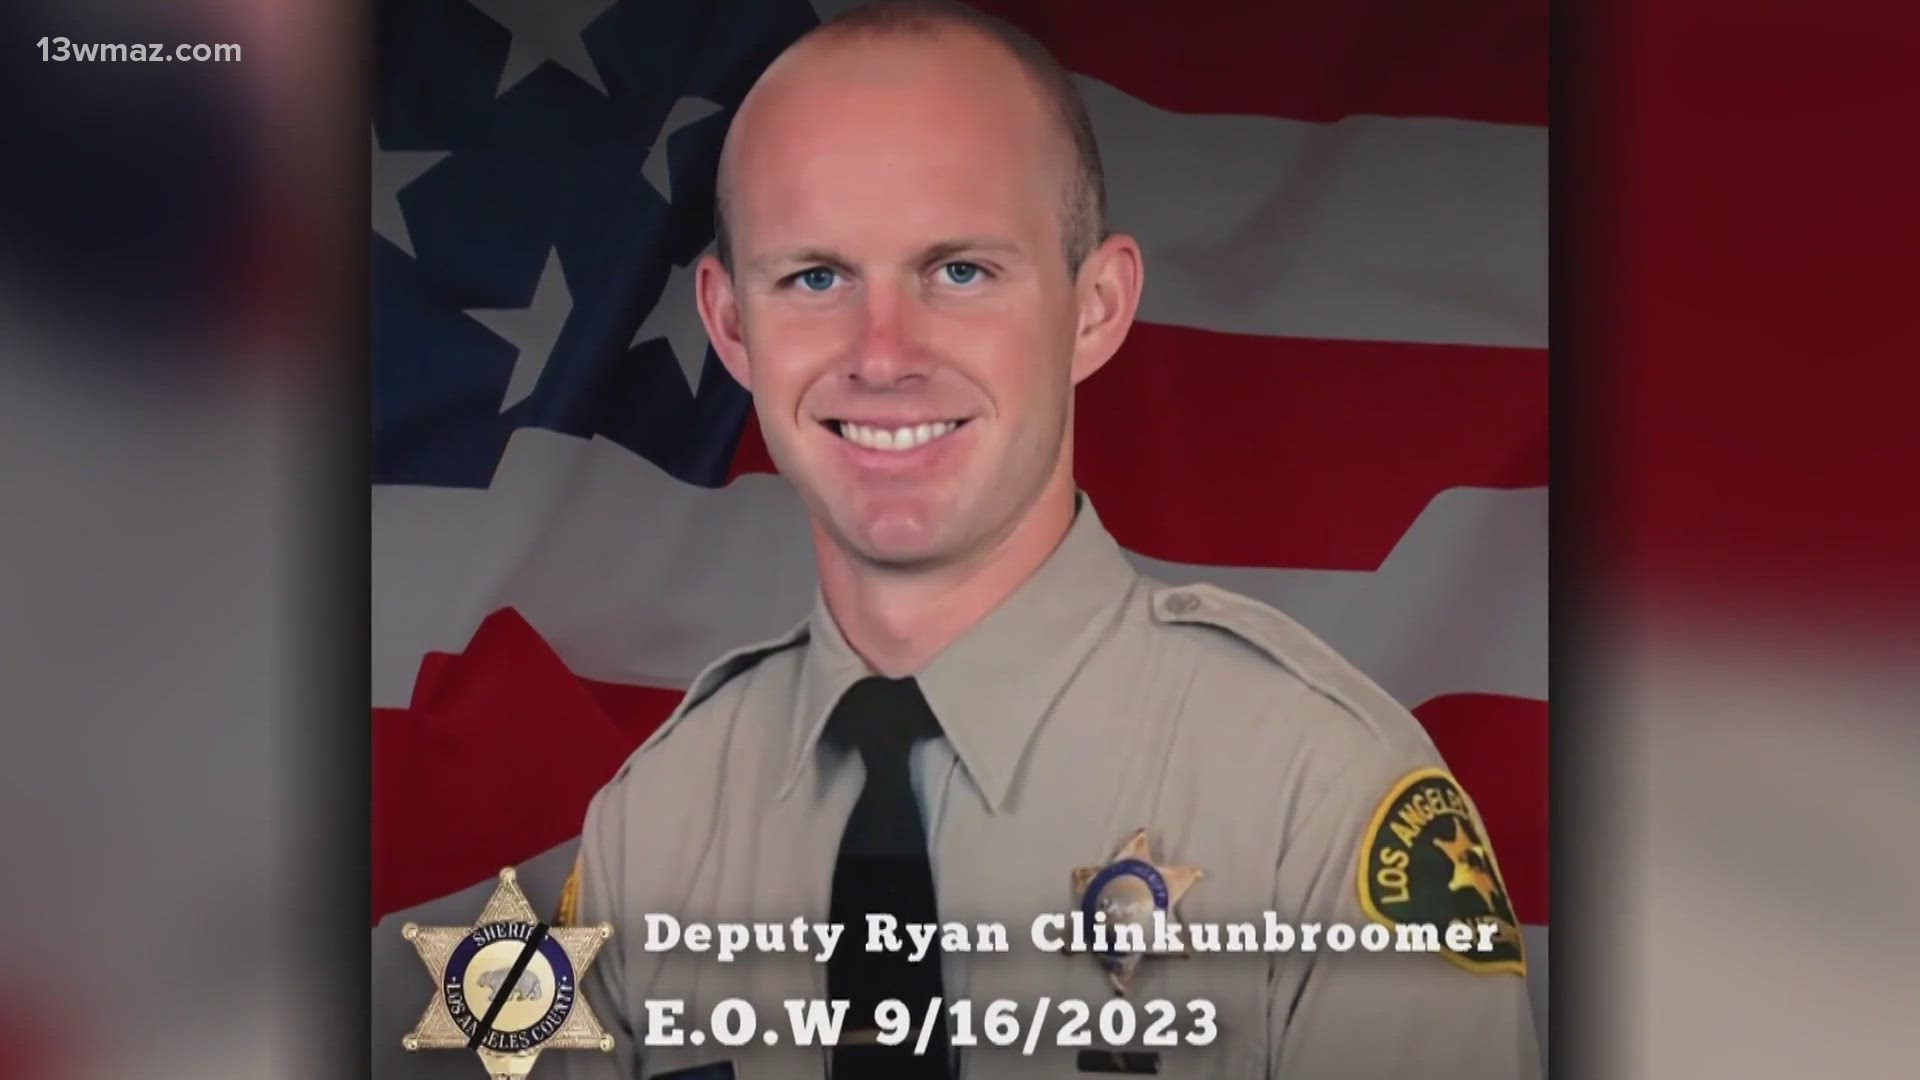 The California deputy was waiting at a red light when a man killed him. Now, an arrest has been made in his death. Here's the latest: